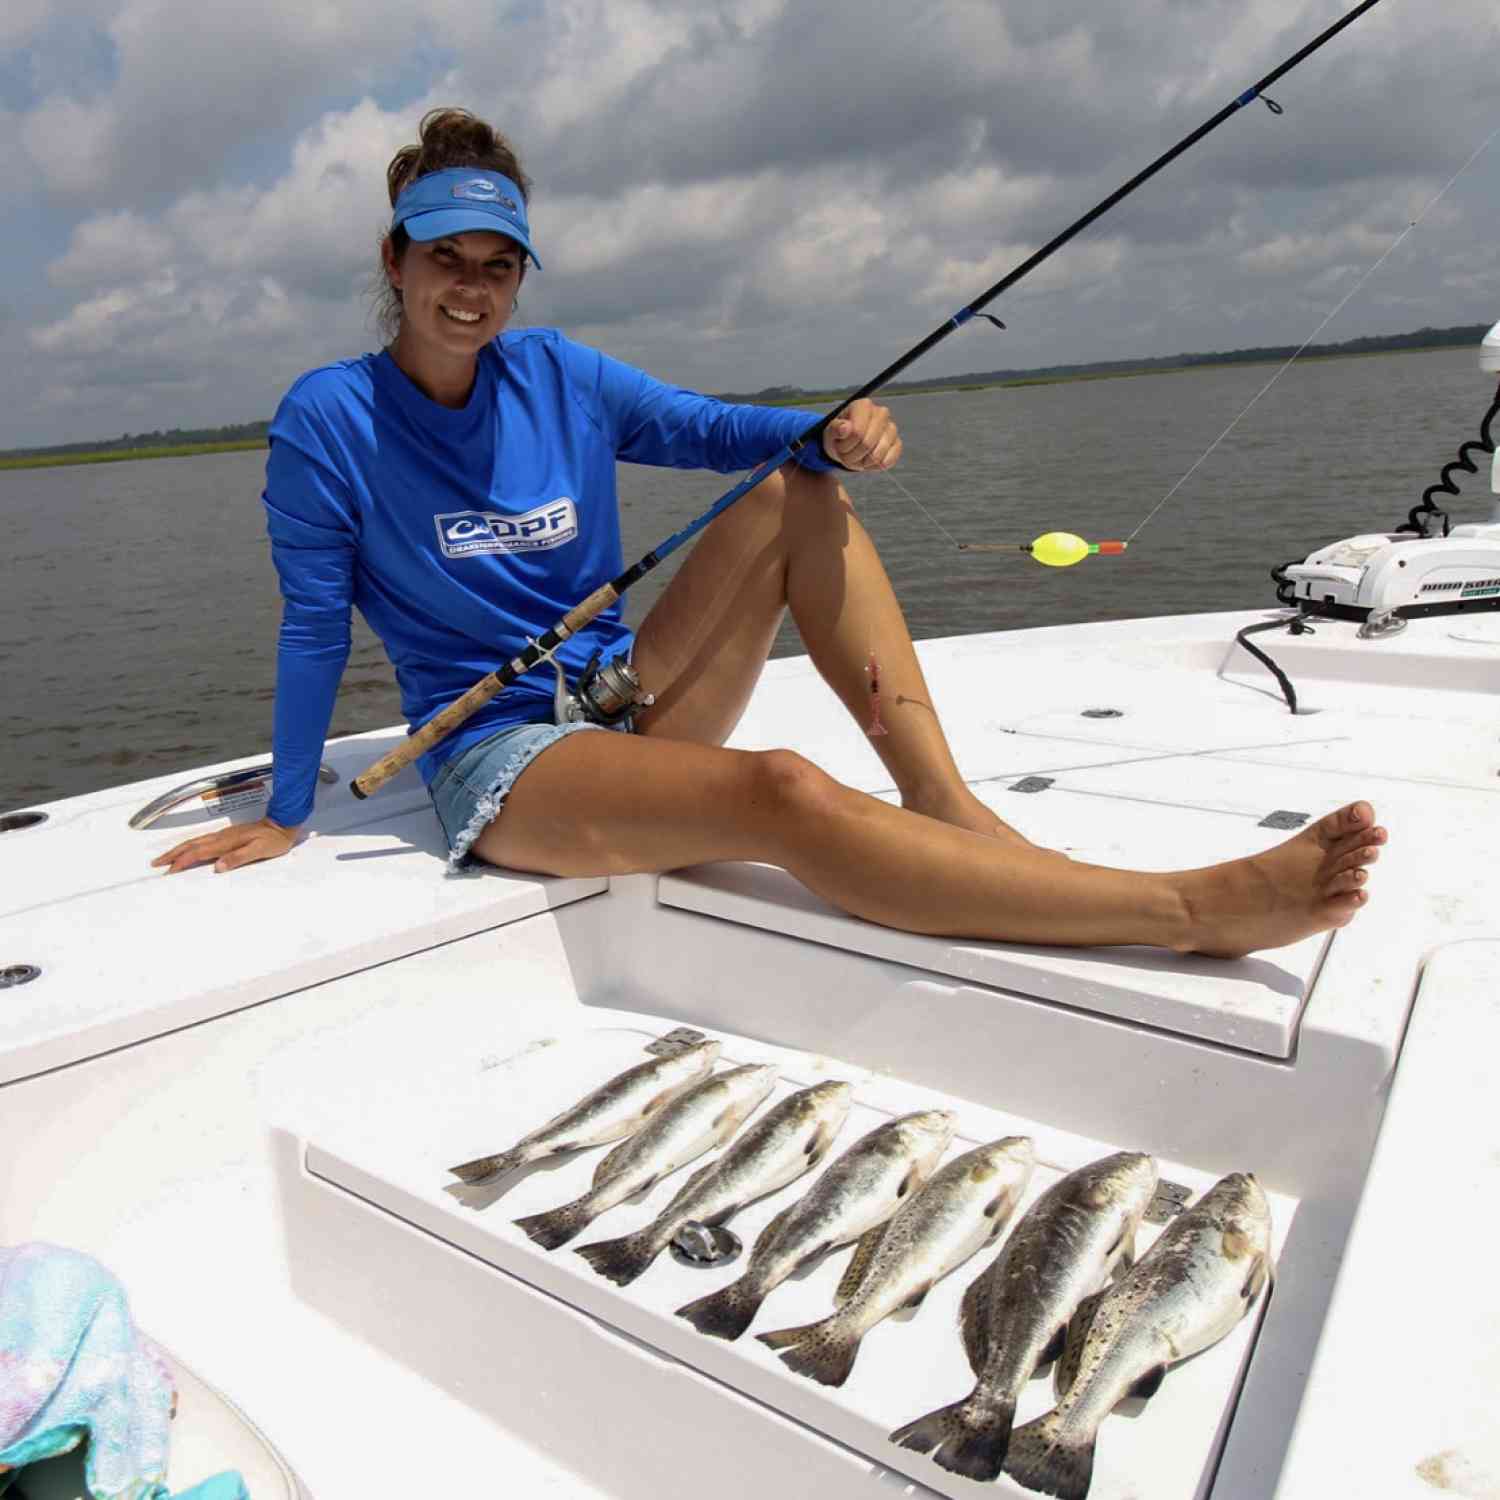 Title: Fish mess of fish on the deck of our new Sportsman. - On board their Sportsman Masters 207 Bay Boat - Location: Shellmans Bluff, Ga. Participating in the Photo Contest #SportsmanJune2020